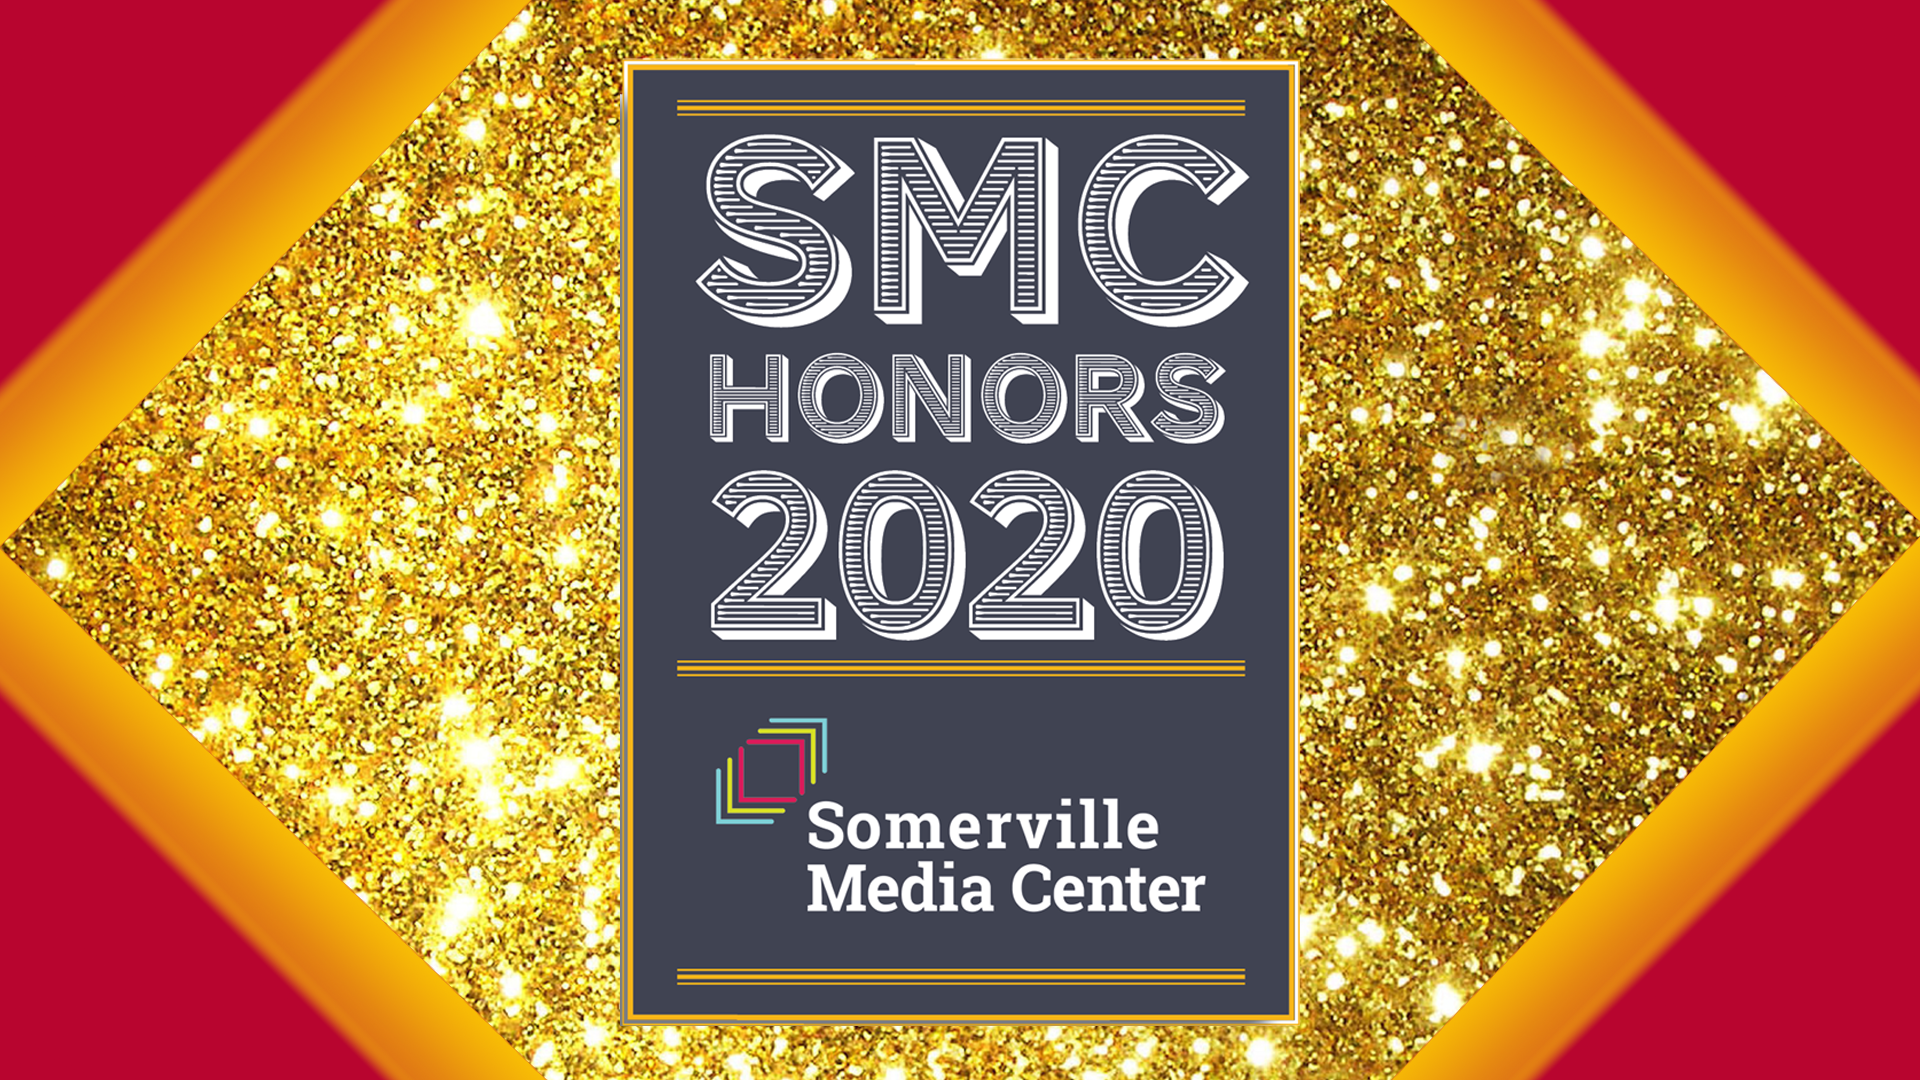 SMC Honors 2020 - celebrate and honor the diverse voices in local media!